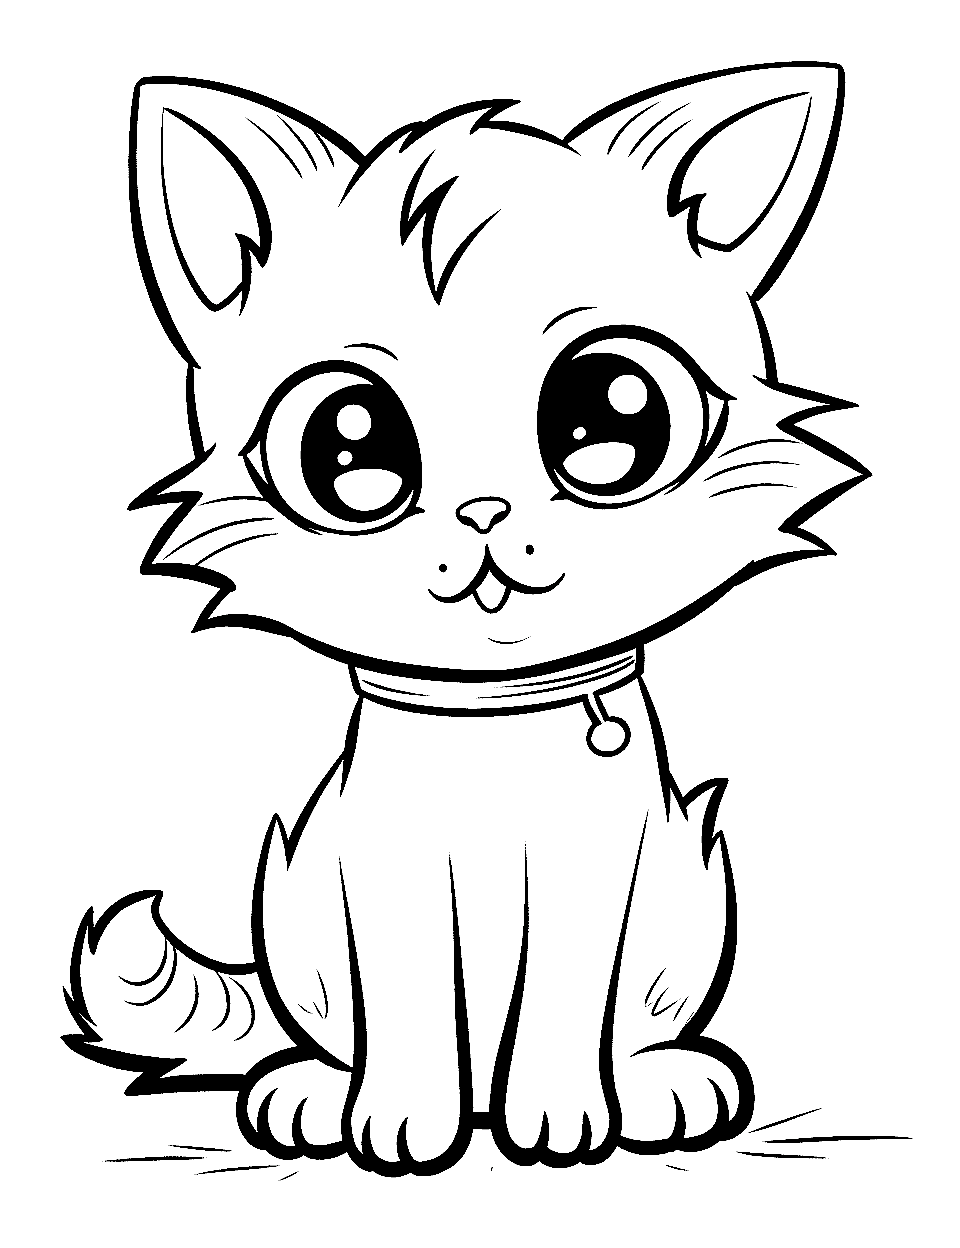 Anime Kitty Dreams Kitten Coloring Page - An anime-styled kitten with big, expressive eyes.